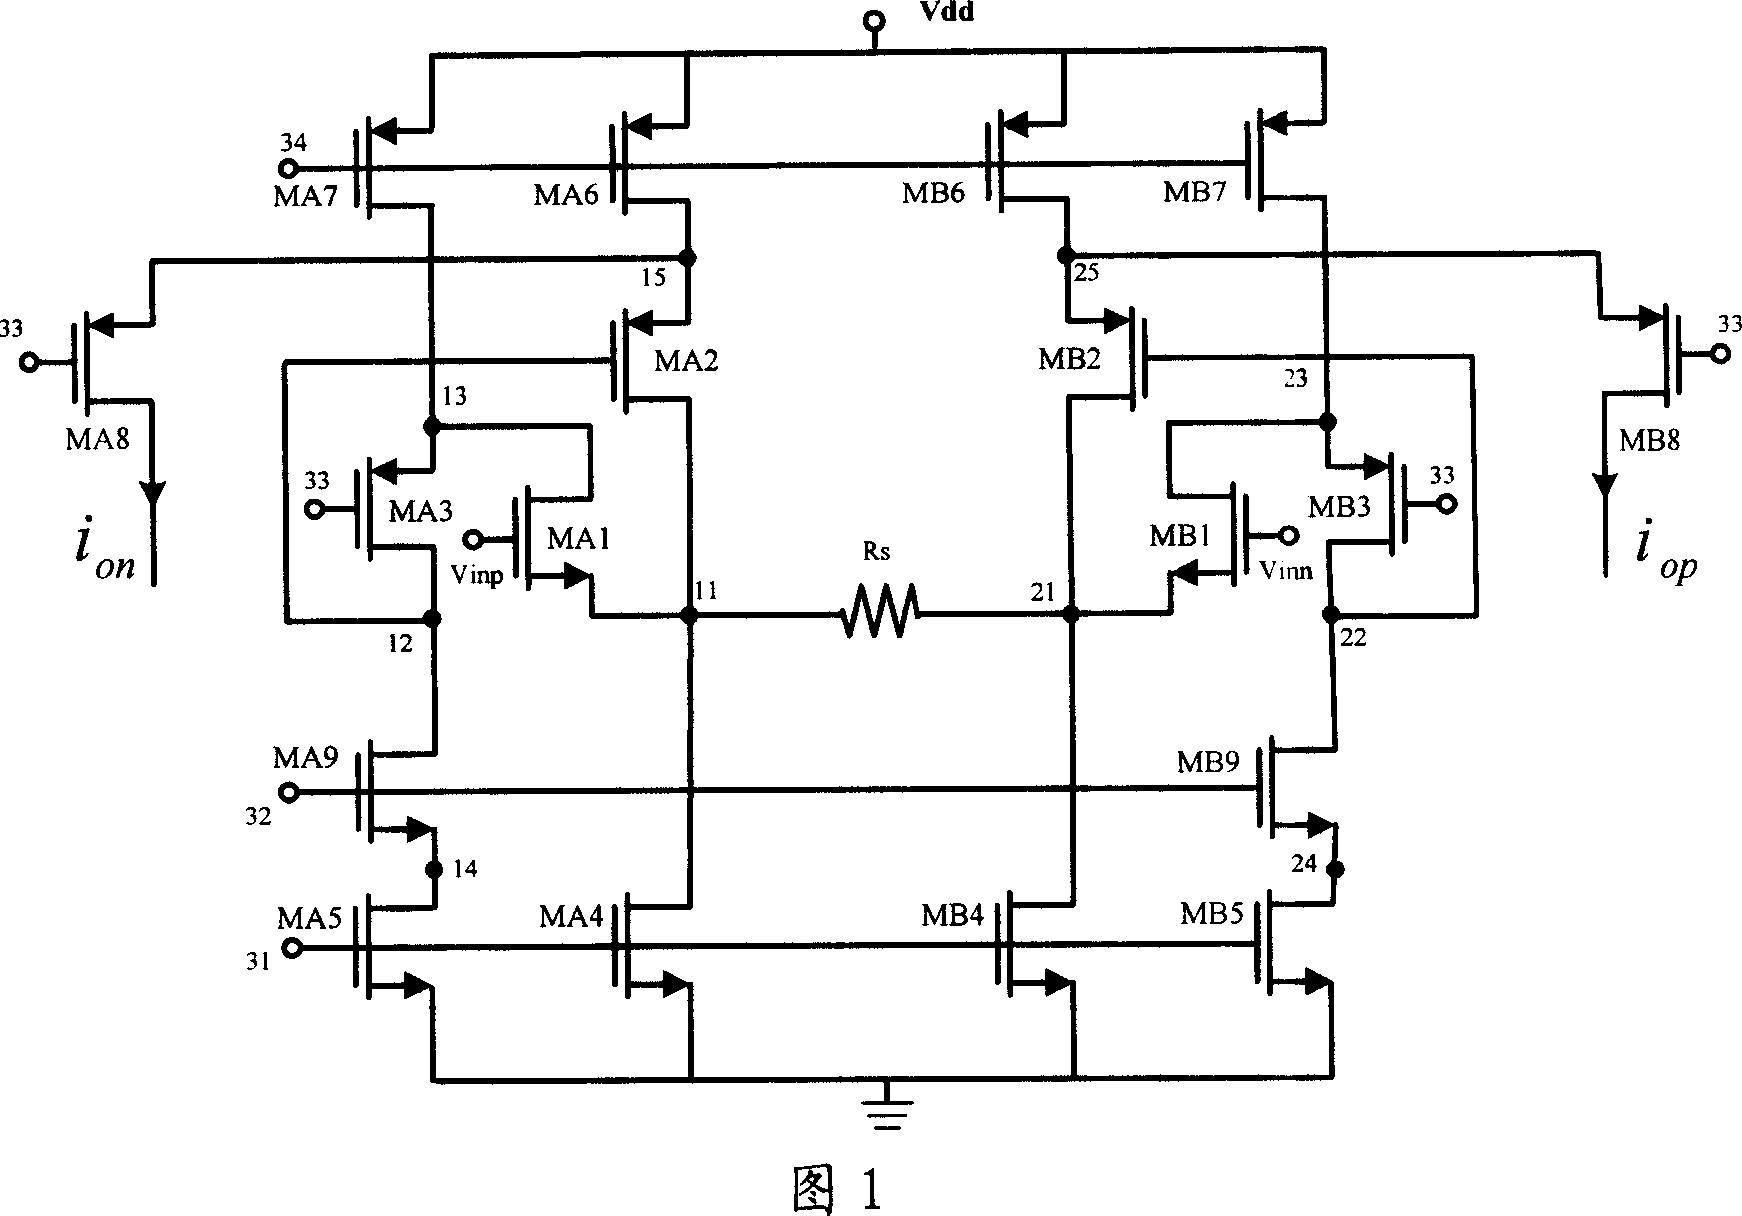 Lower voltage conductor-spanning amplifier capable of improving the linearity and input range